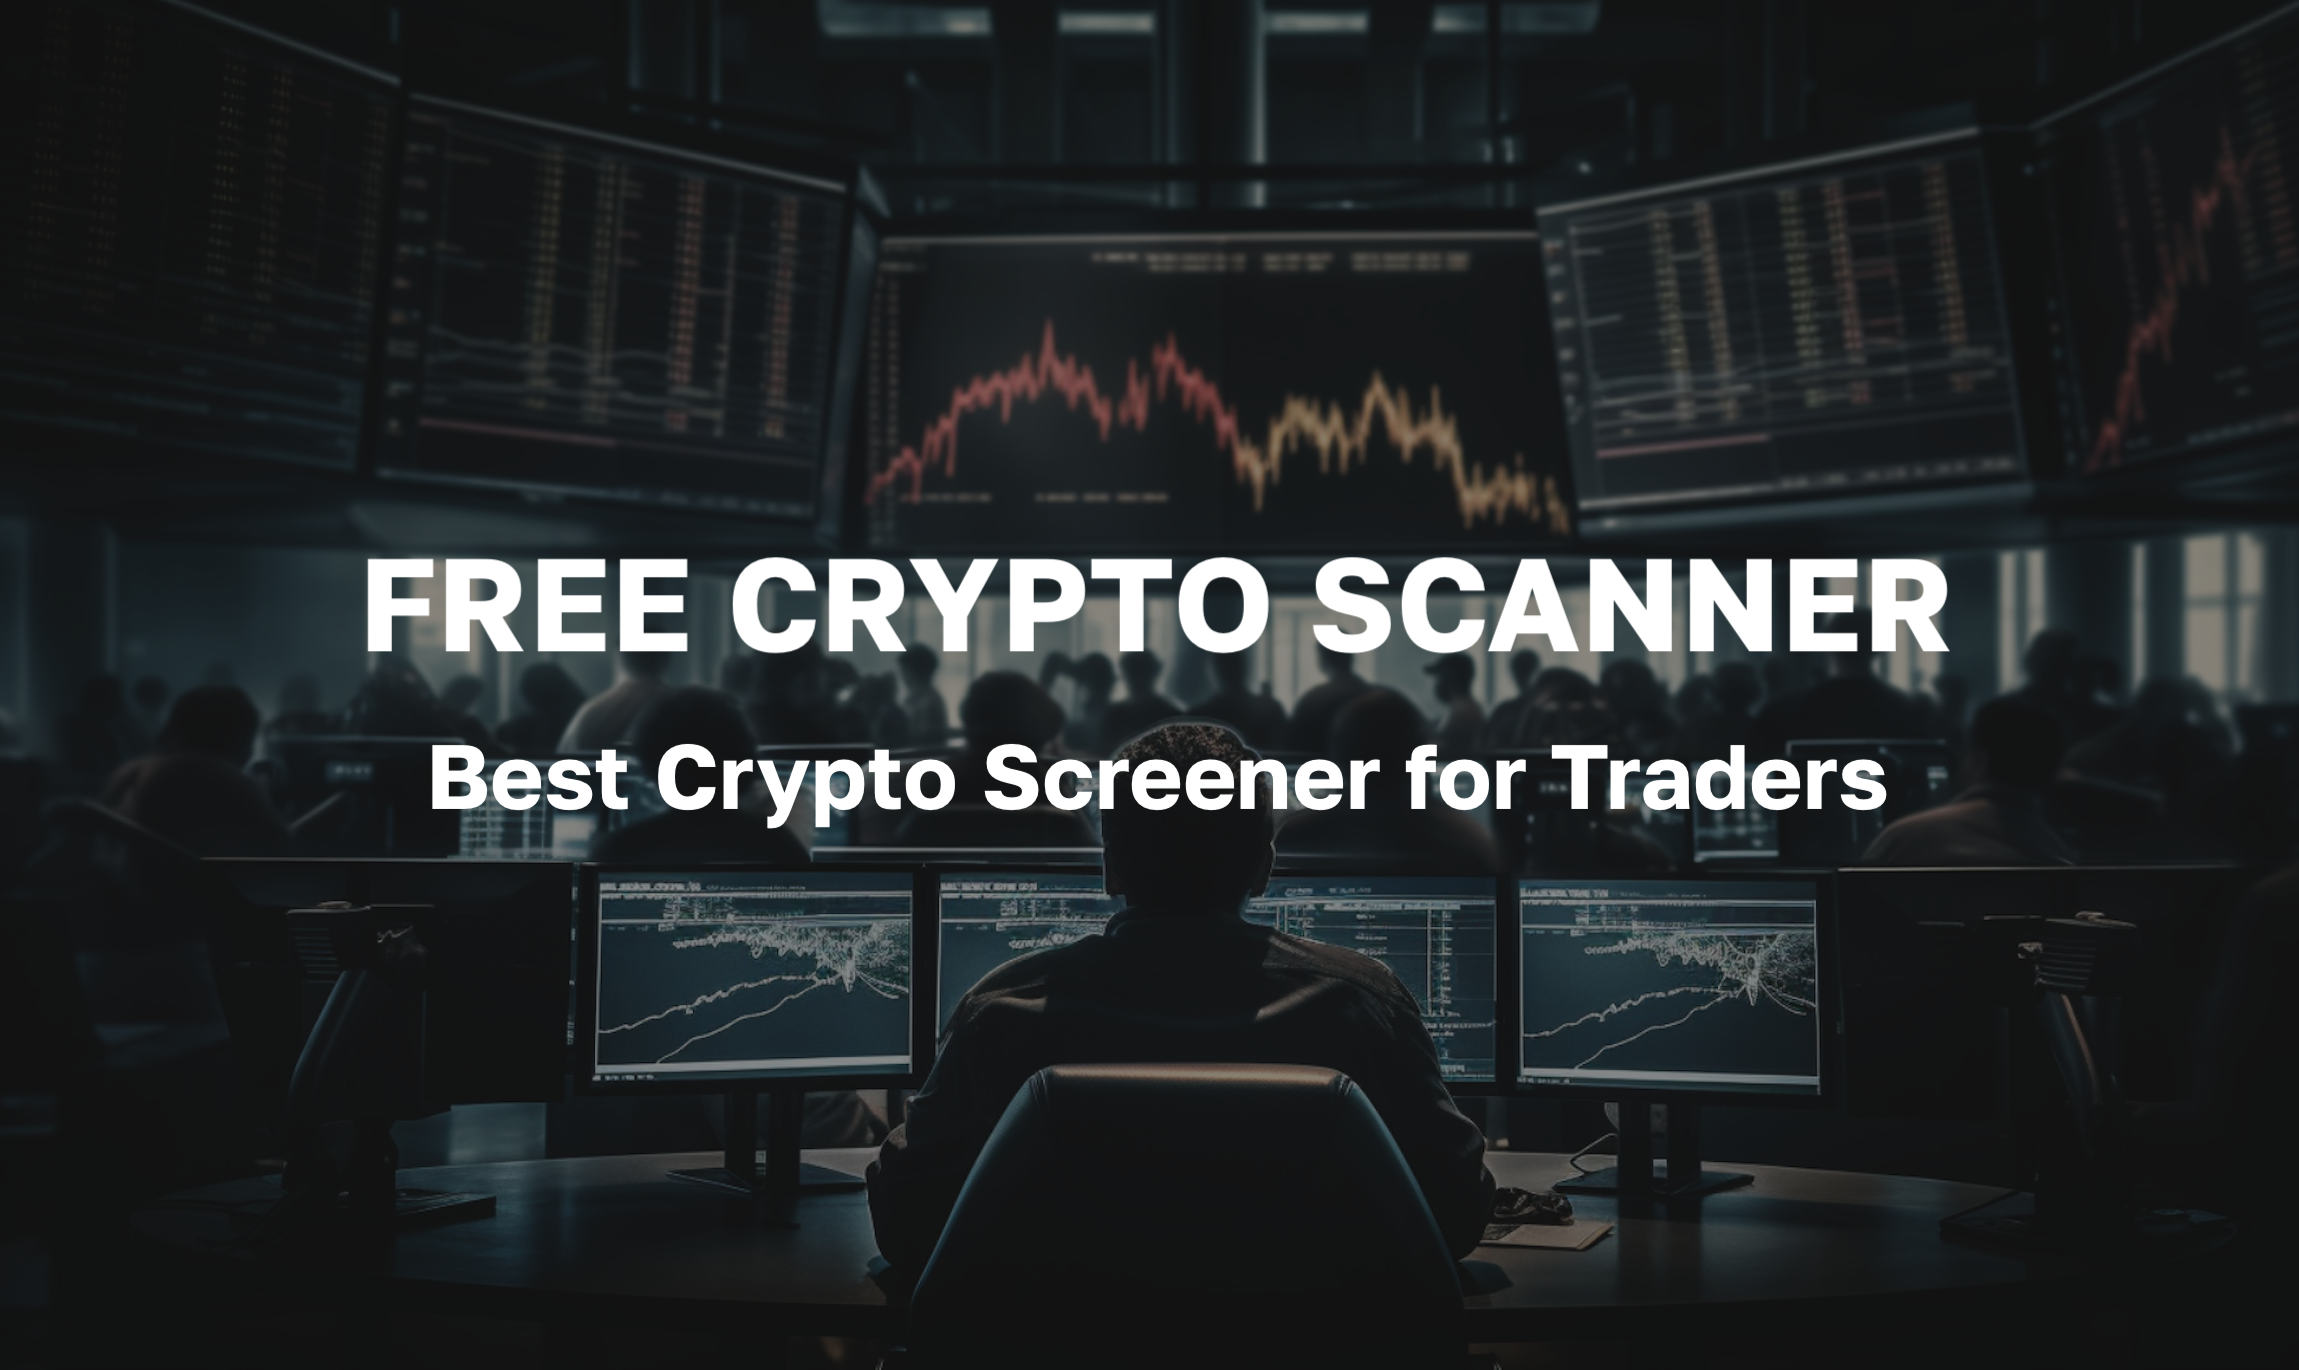 Free Crypto Scanner - Best Crypto Screener for Traders